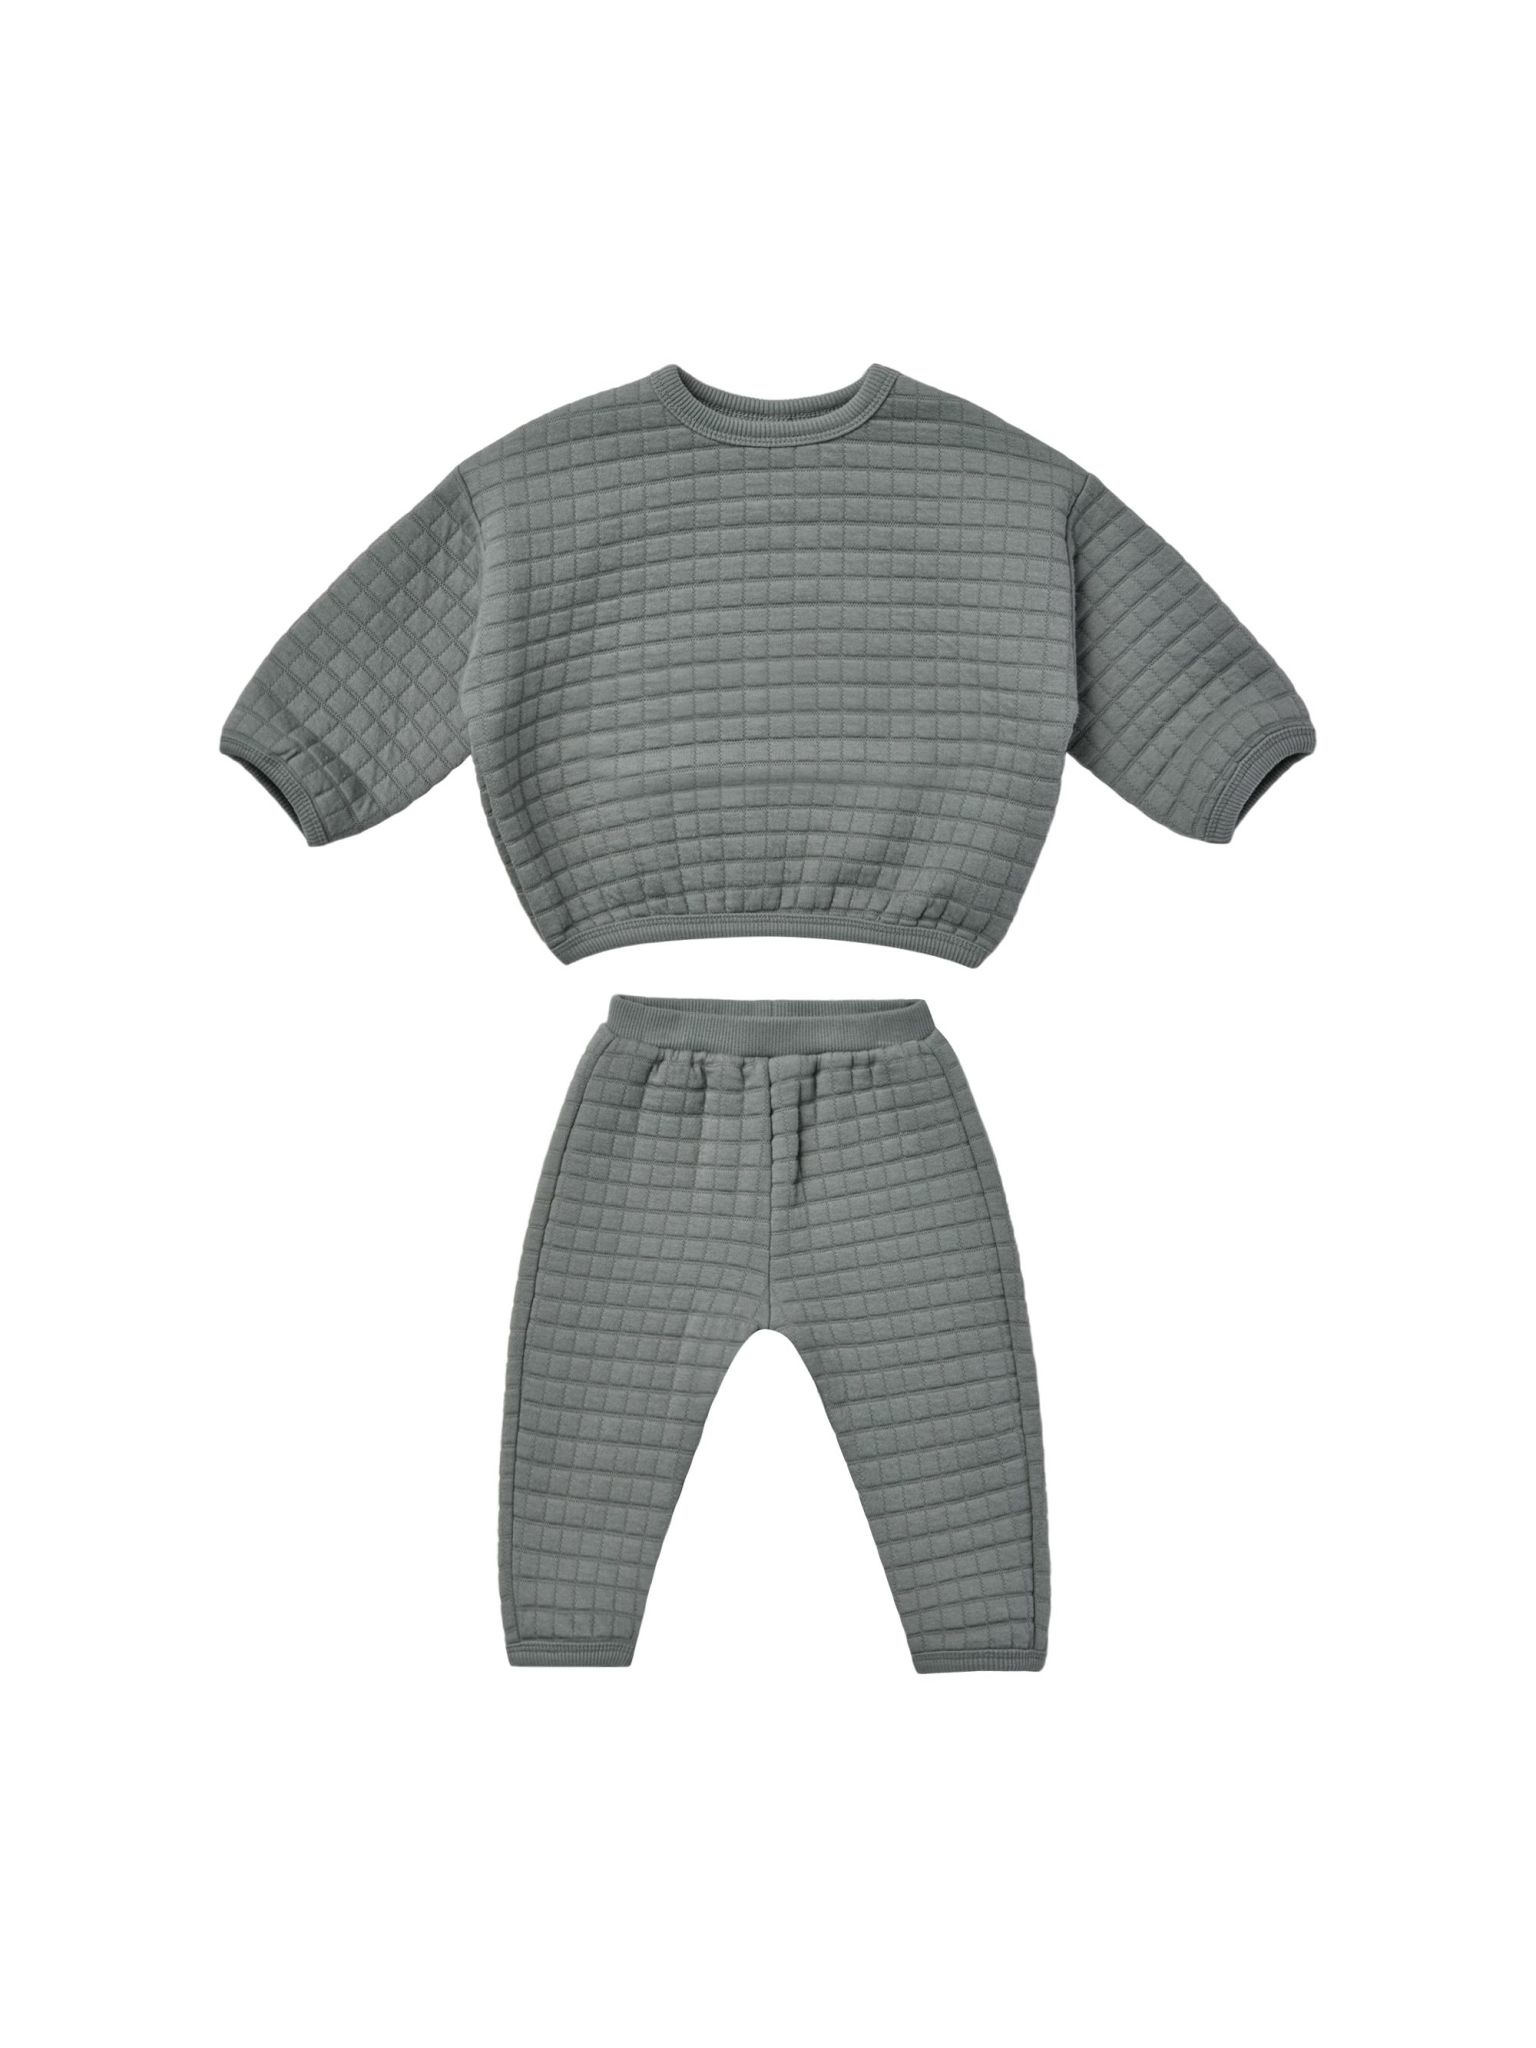 Quincy Mae Quincy Mae Quilted Sweater & Pant Set